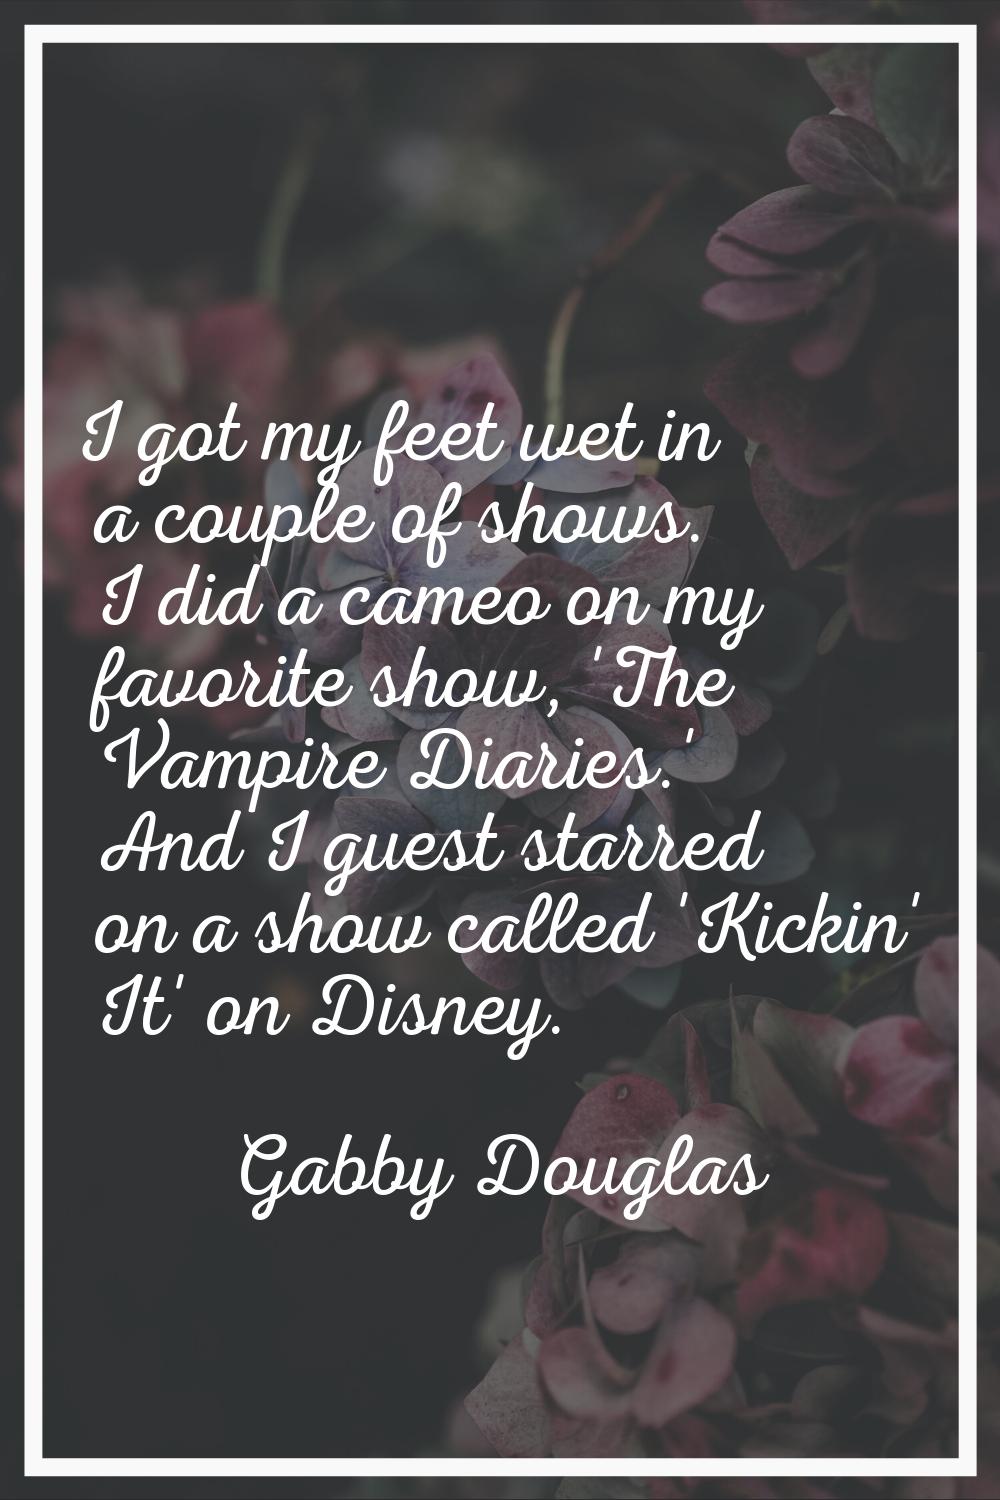 I got my feet wet in a couple of shows. I did a cameo on my favorite show, 'The Vampire Diaries.' A